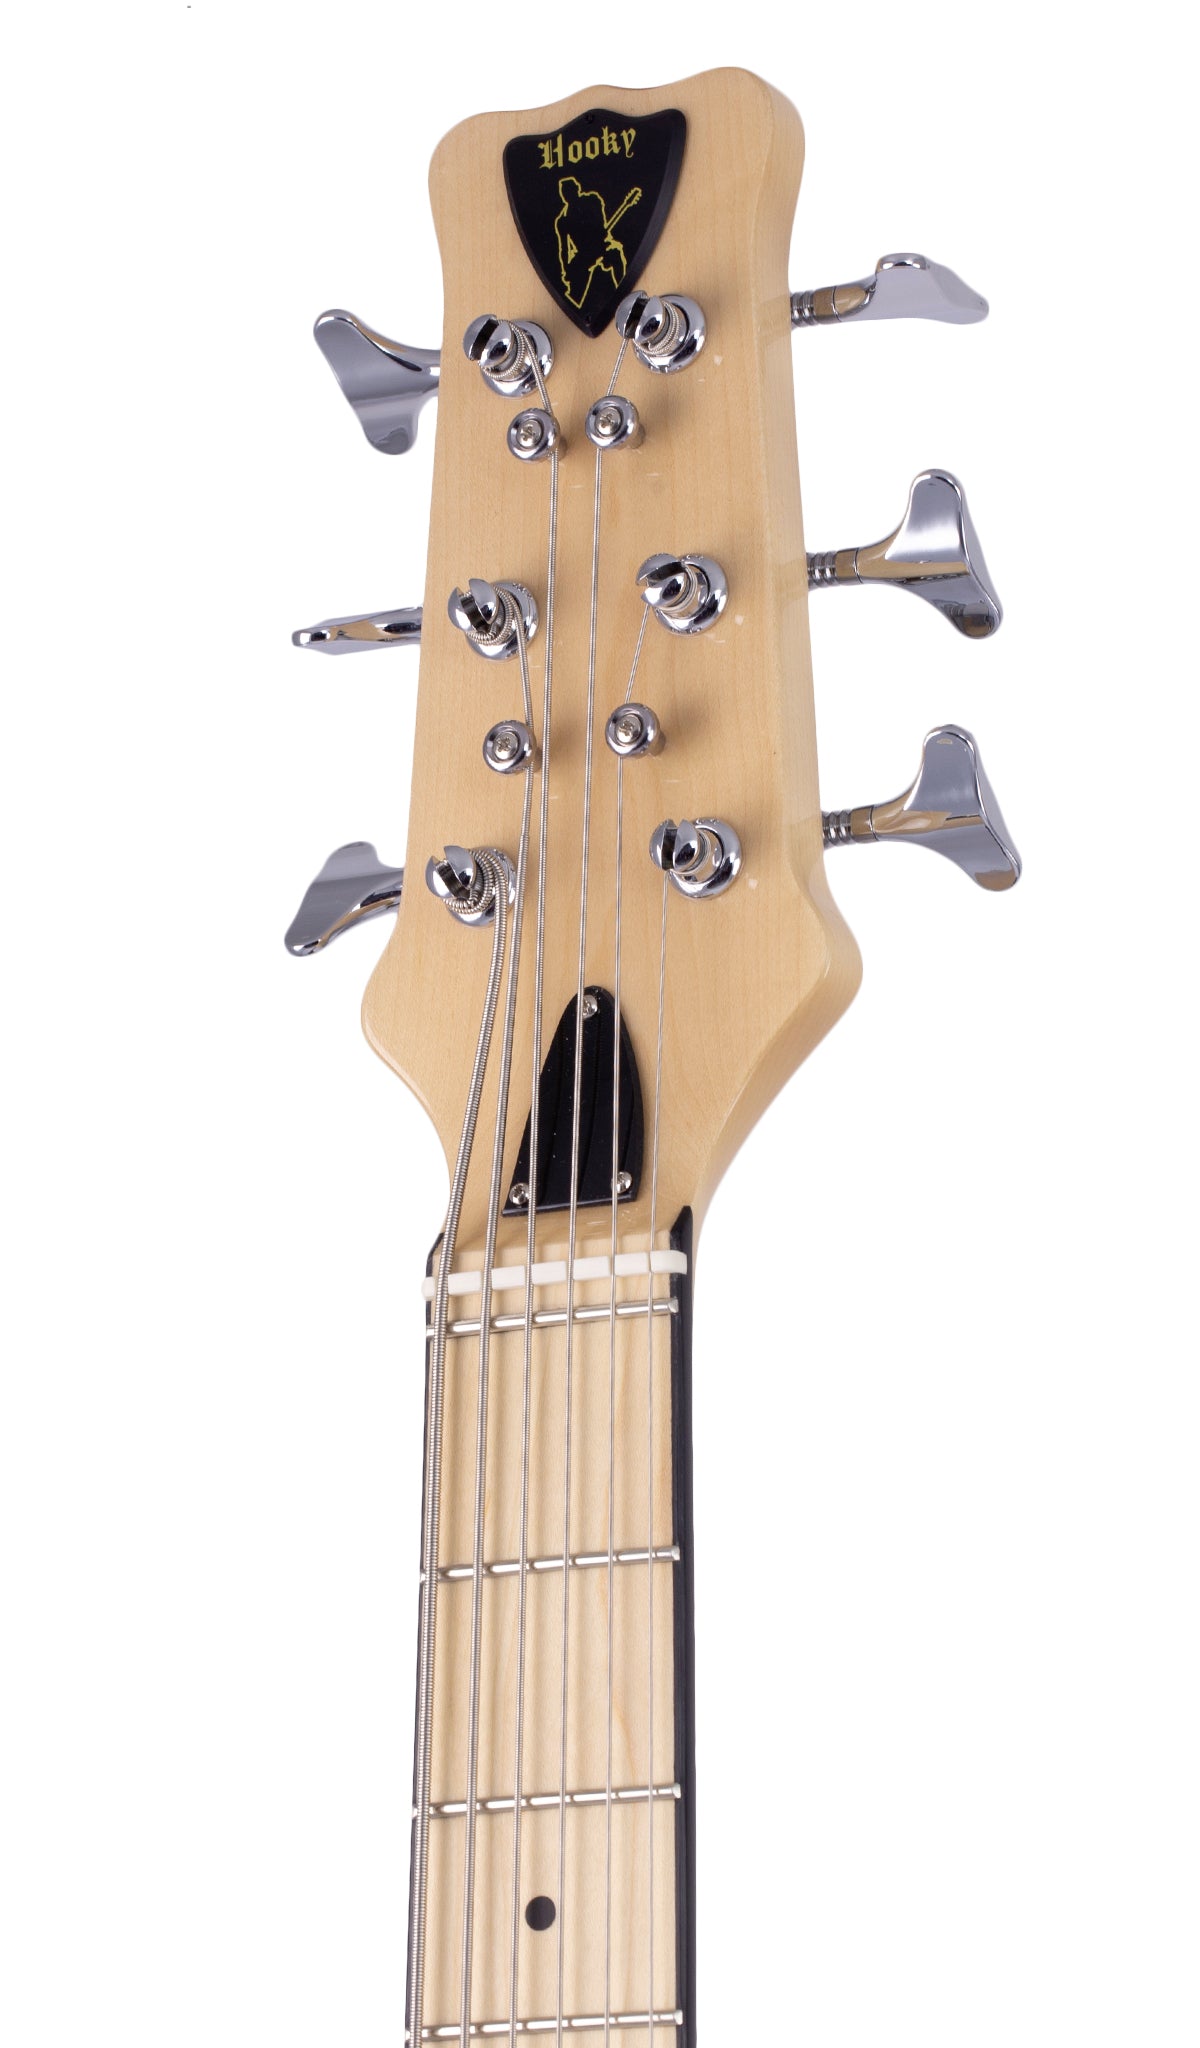 Eastwood Hooky Bass 6 Pro Red